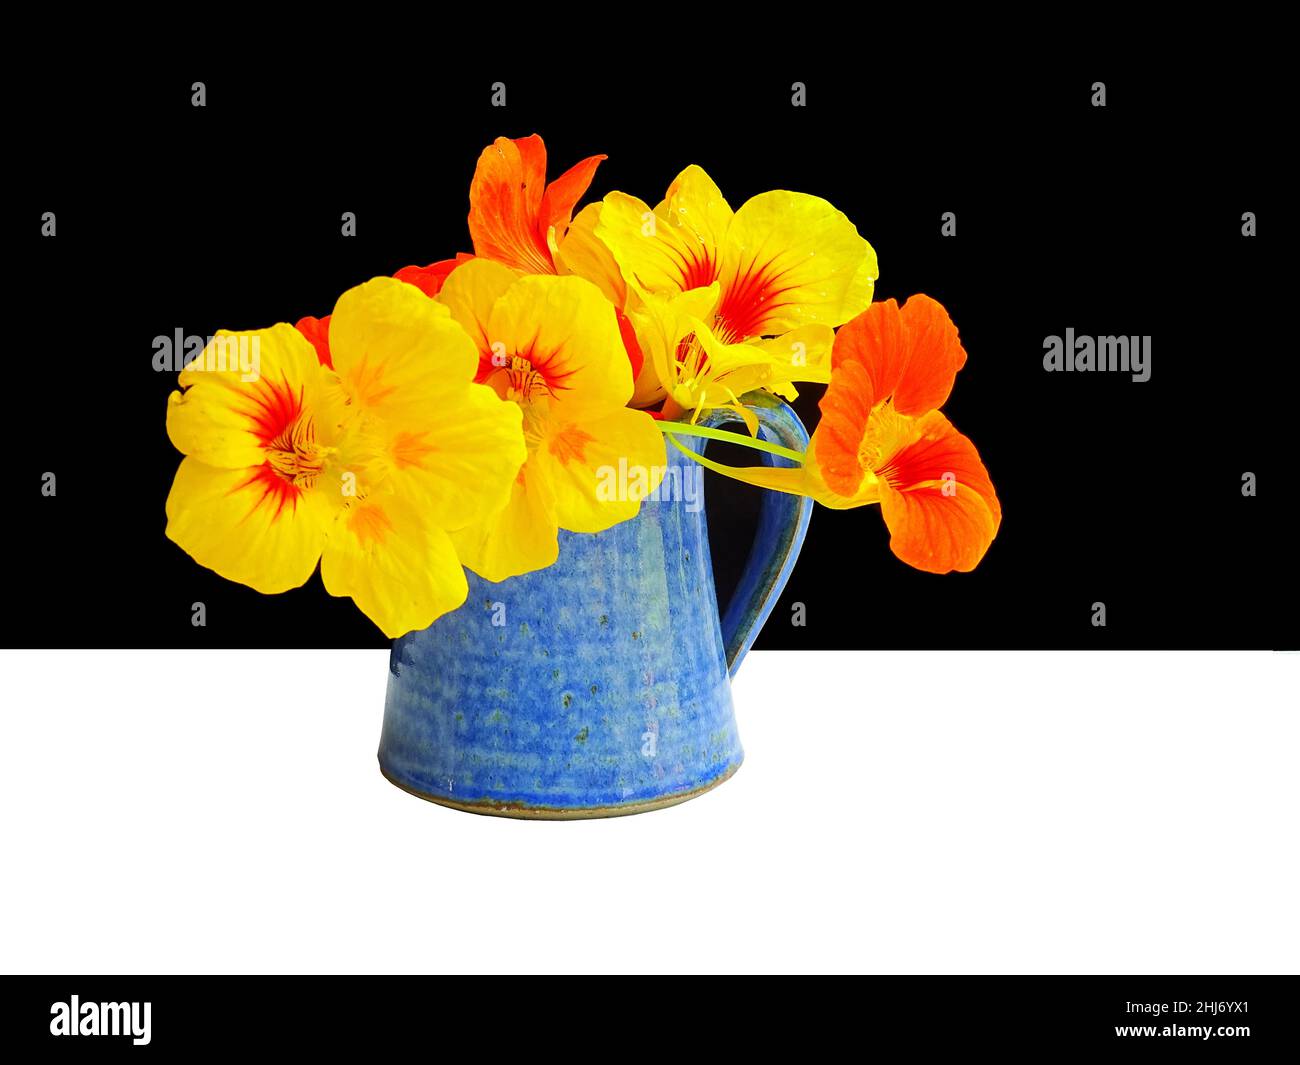 a bunch of orange and yellow flowers of nasturtiums (Tropaeolum majus) in a blue vase, with a black and white background, with colors yellow, orange, Stock Photo